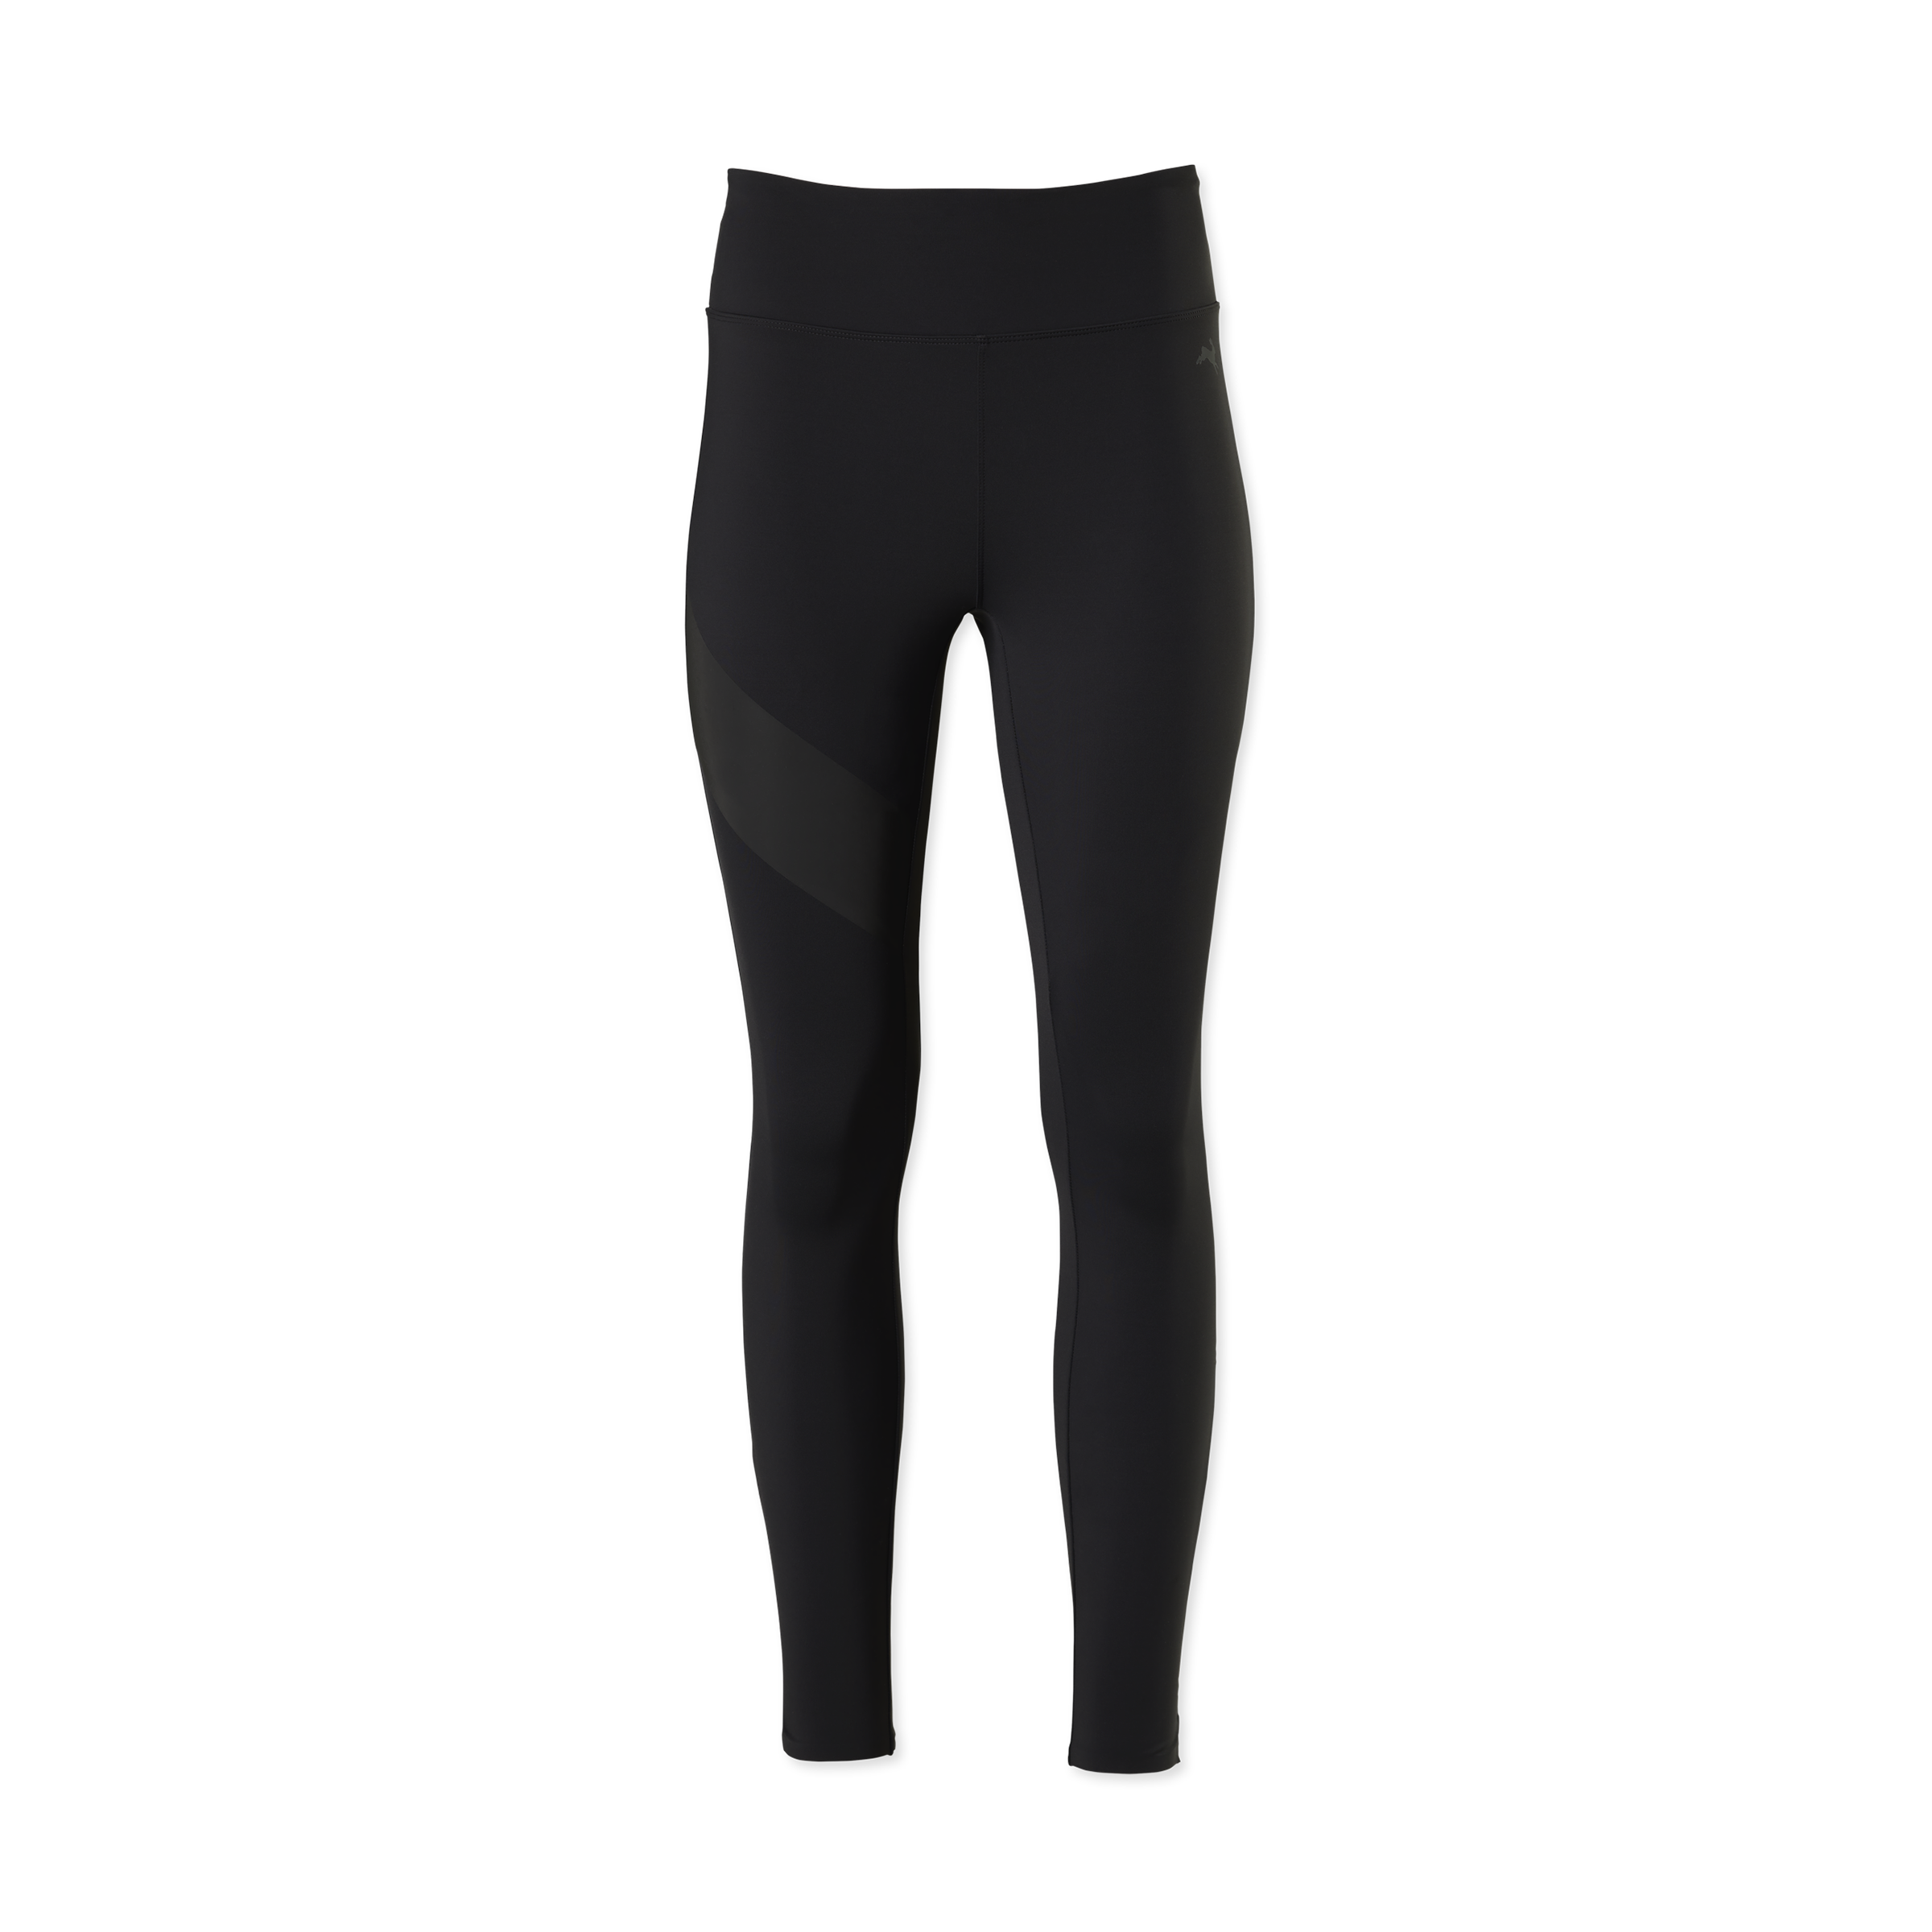 NEW Tracksmith - Turnover Tights Lined  Tights, Running tights, Clothes  design